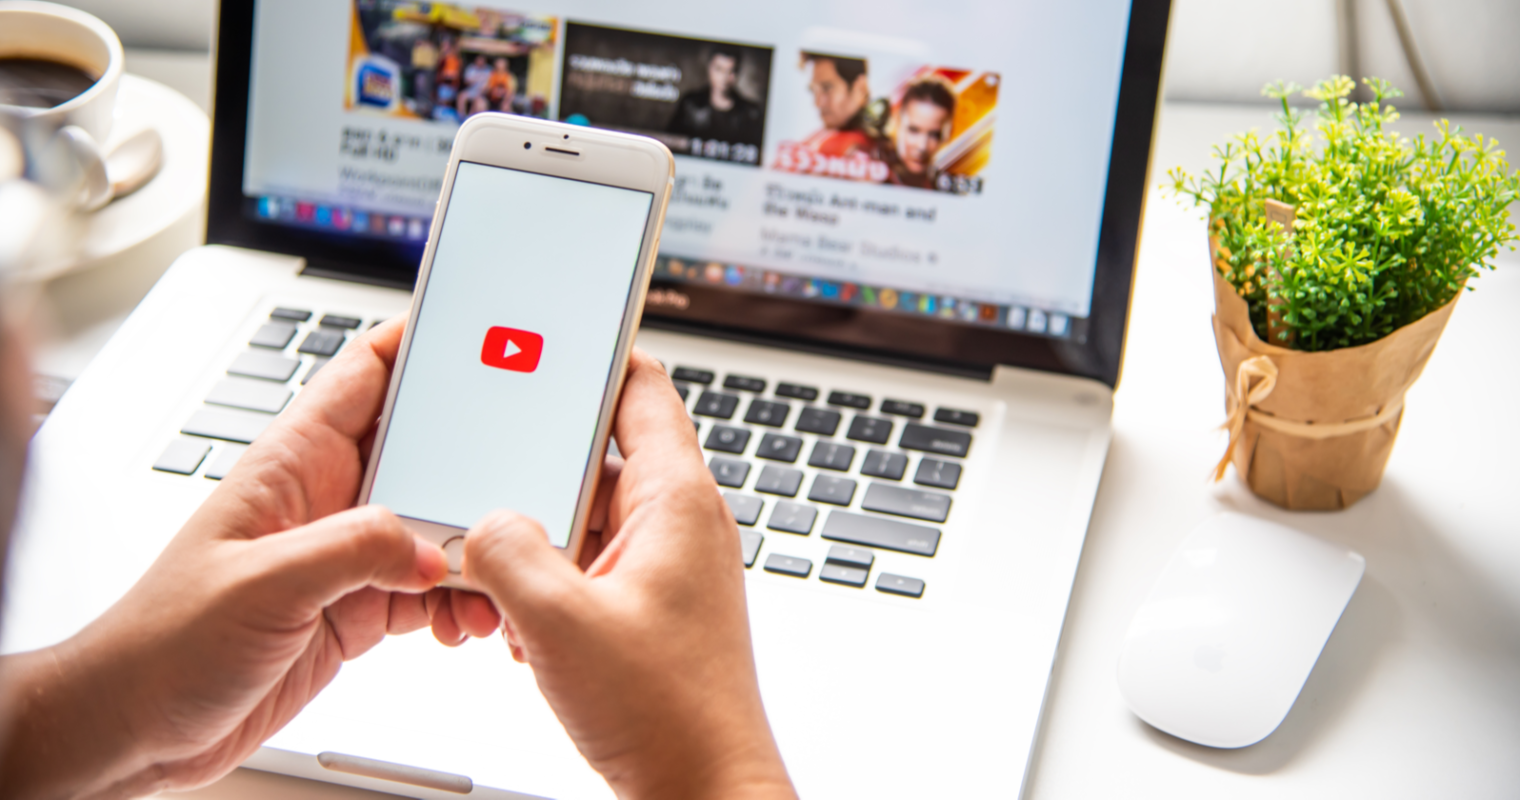 Buying YouTube channels is good for marketing businesses